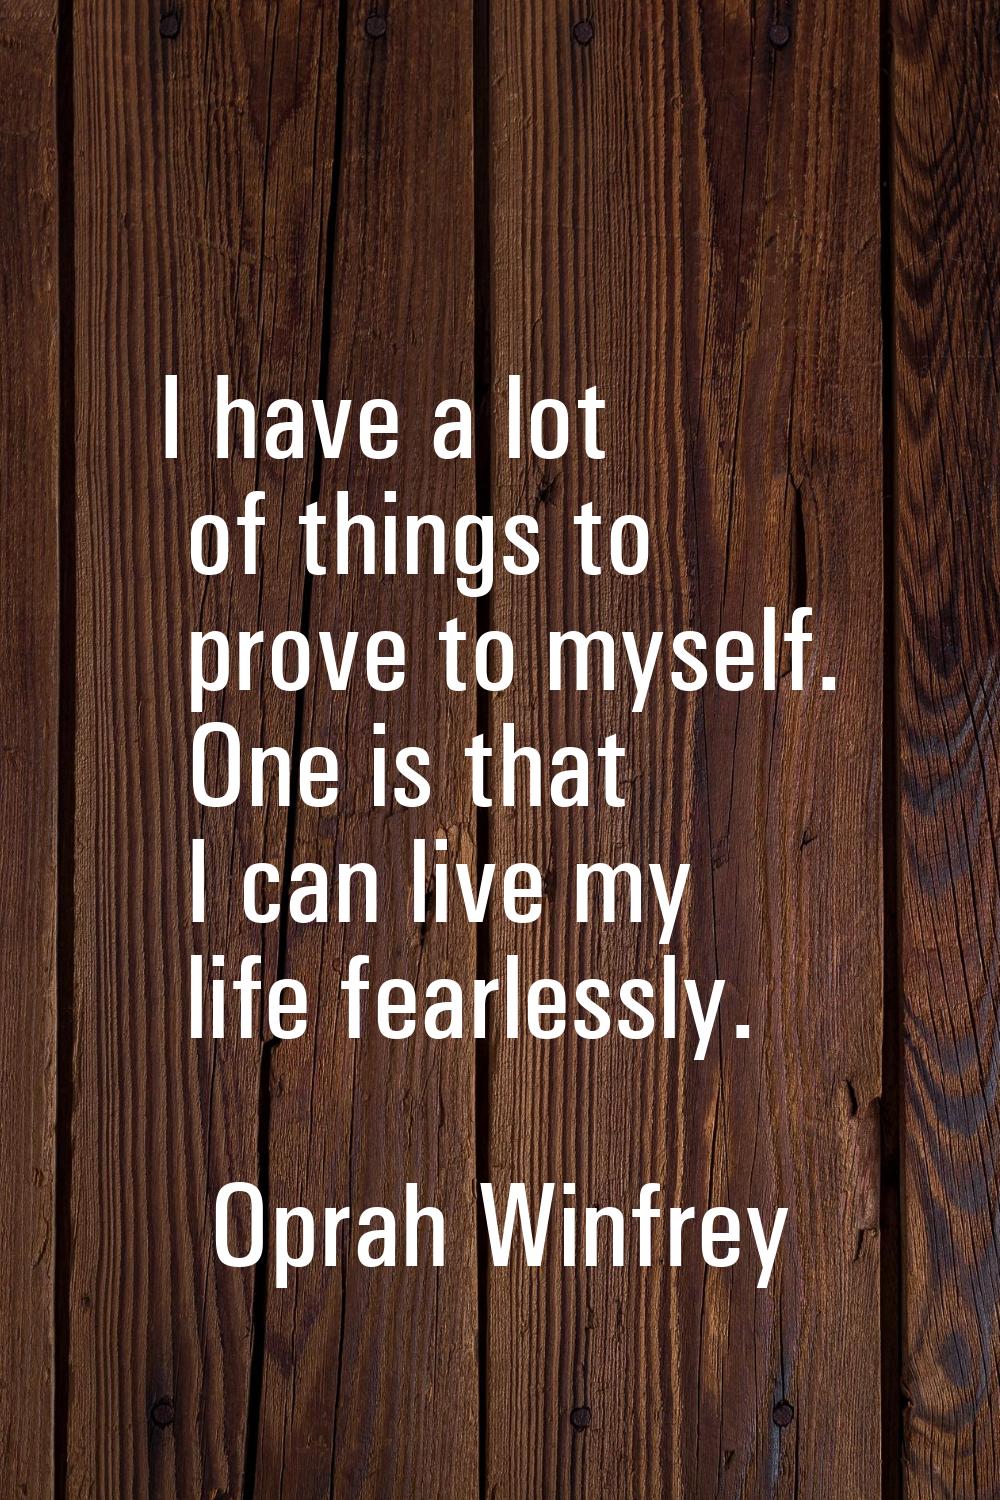 I have a lot of things to prove to myself. One is that I can live my life fearlessly.